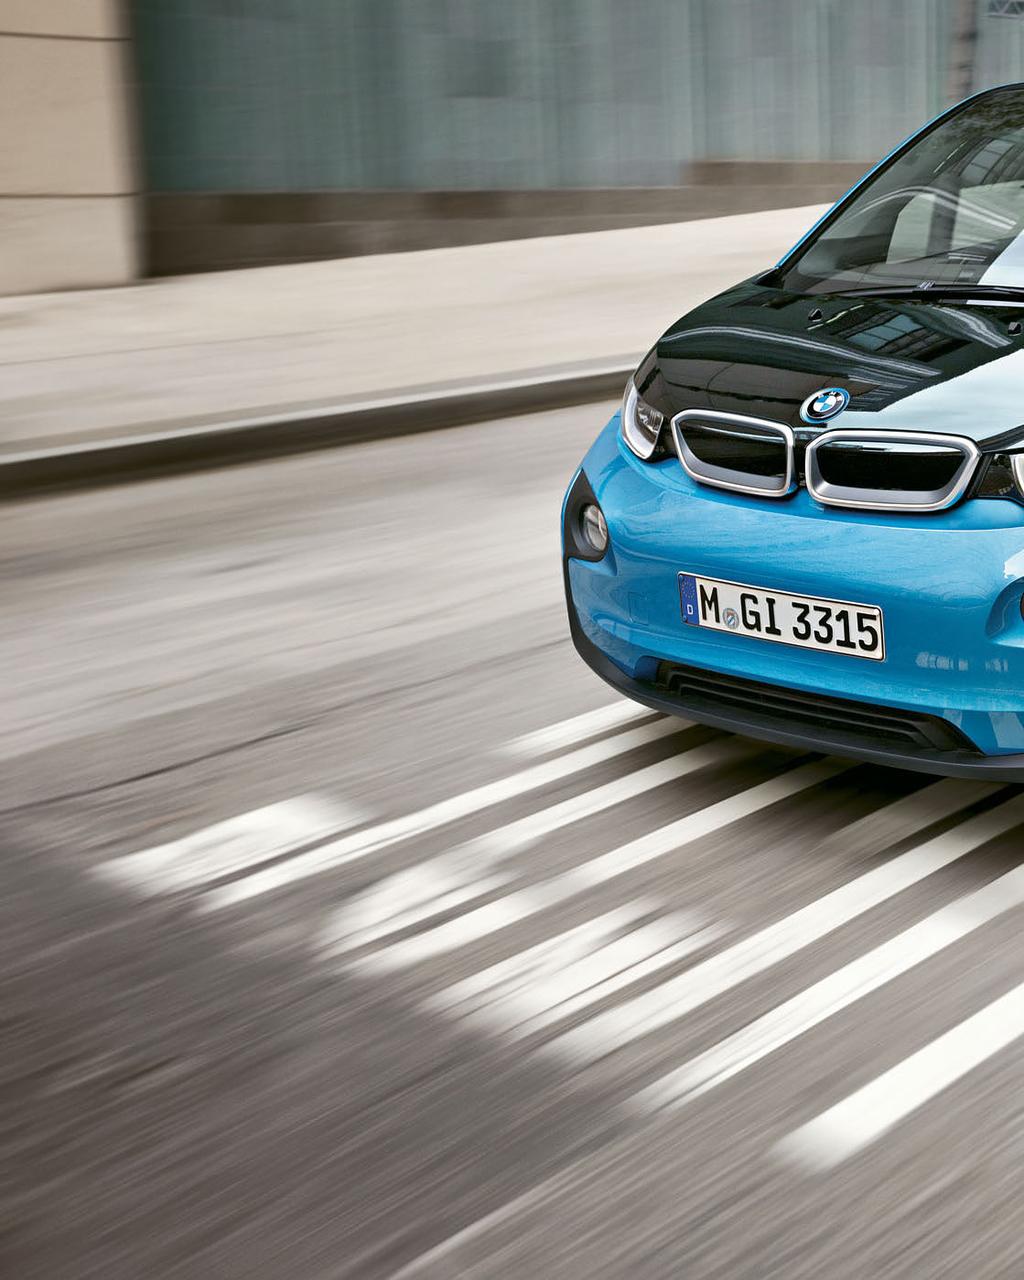 THE BMW i3 14 15 PROGRESS HITS THE STREETS. The BMW i3 is your ideal partner for the city.